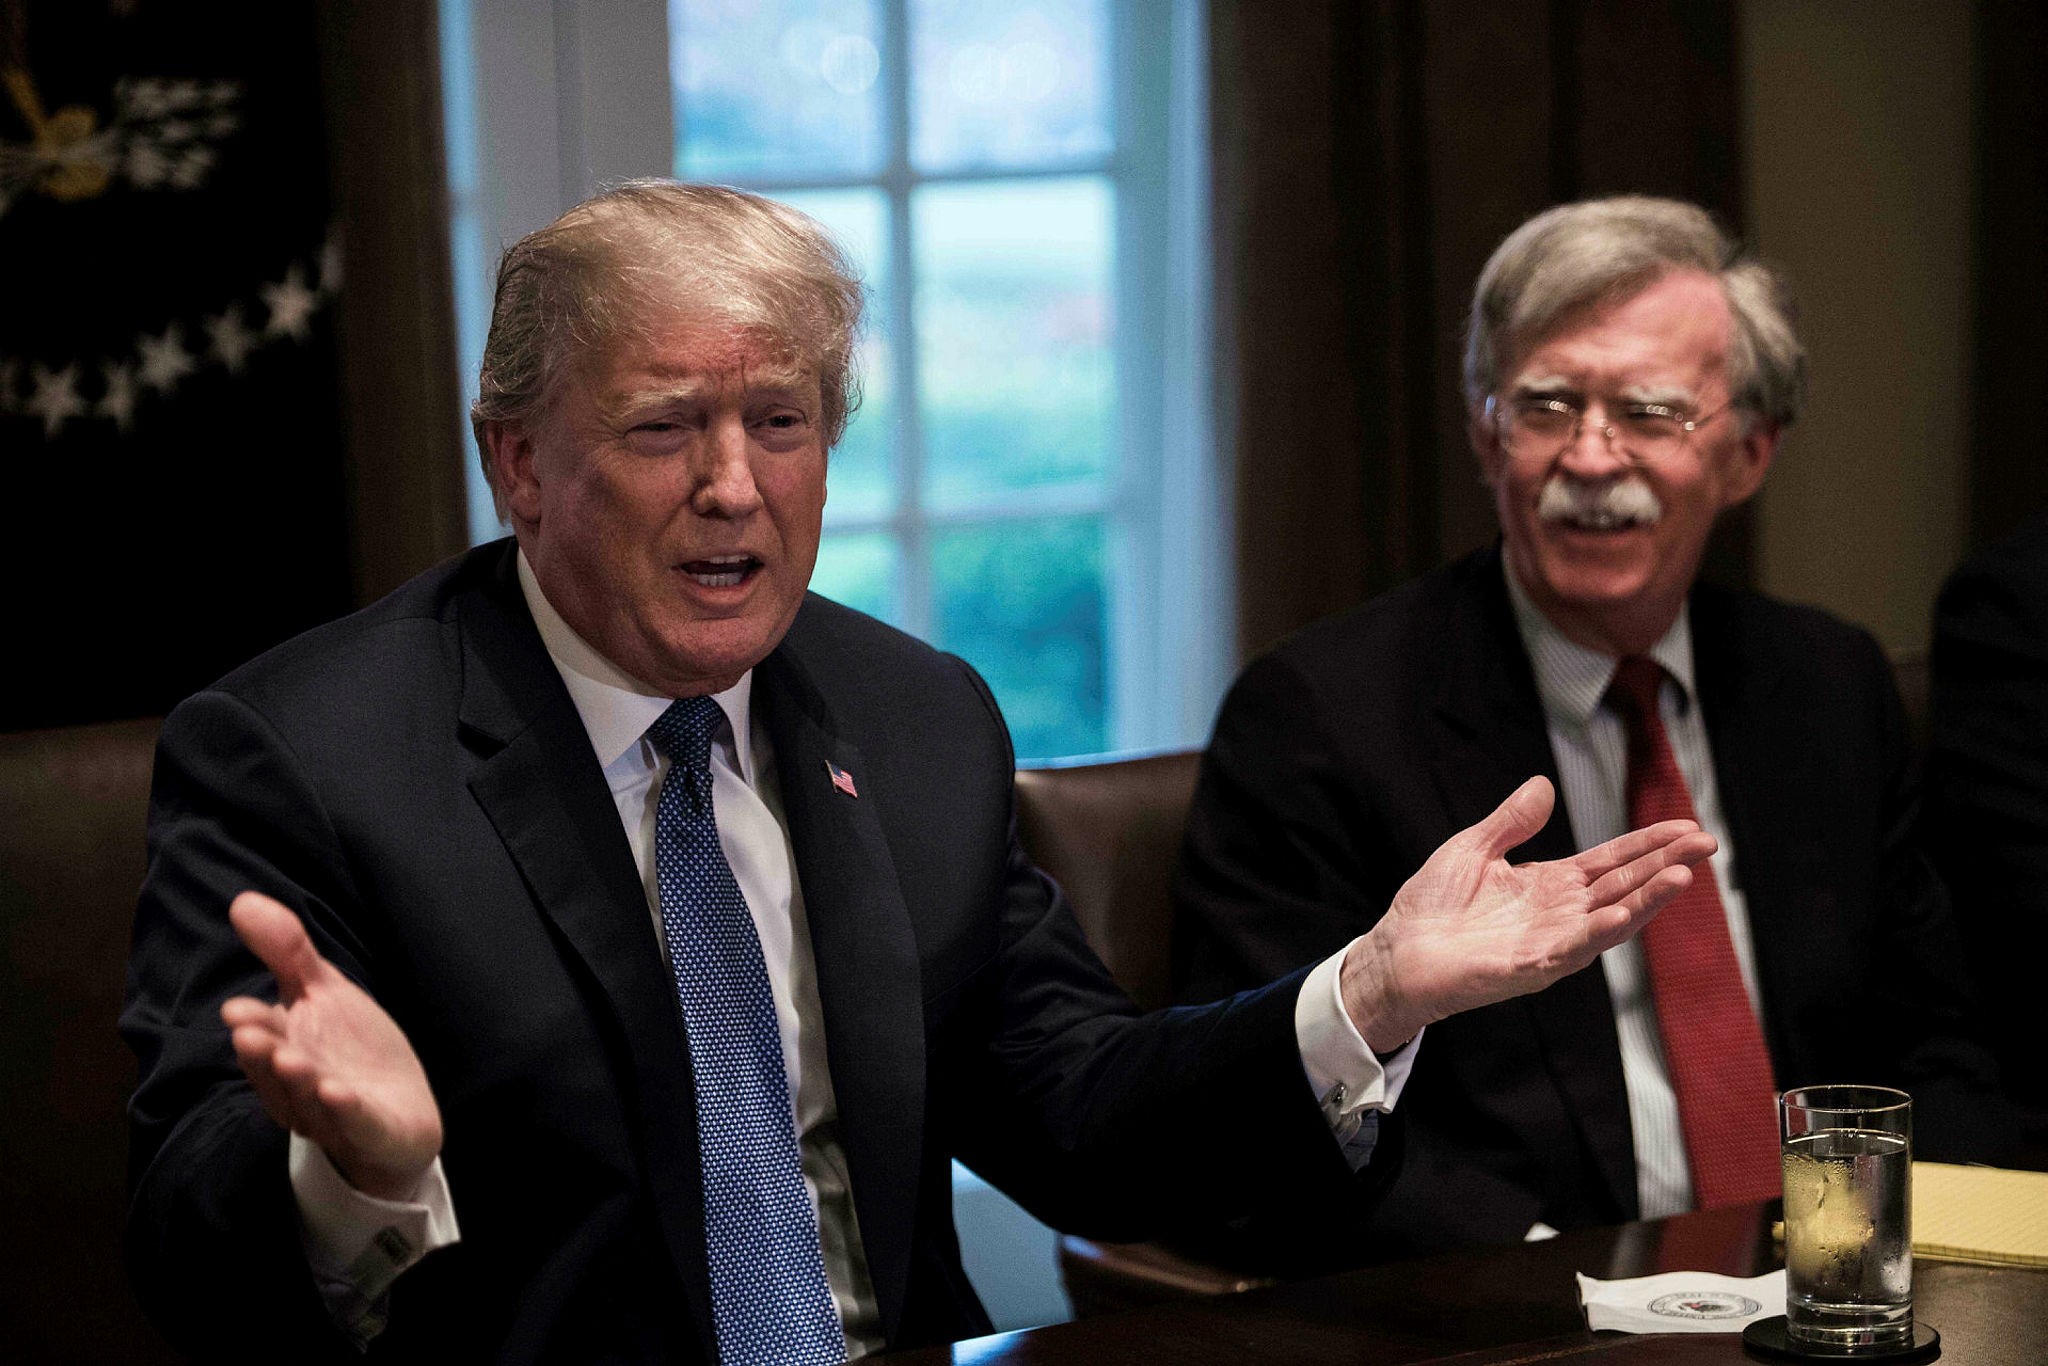 US President Donald Trump speaks during a meeting with senior military leaders at the White House in Washington, DC, on April 9, 2018. At right is new National Security Advisor John Bolton. (AFP Photo)